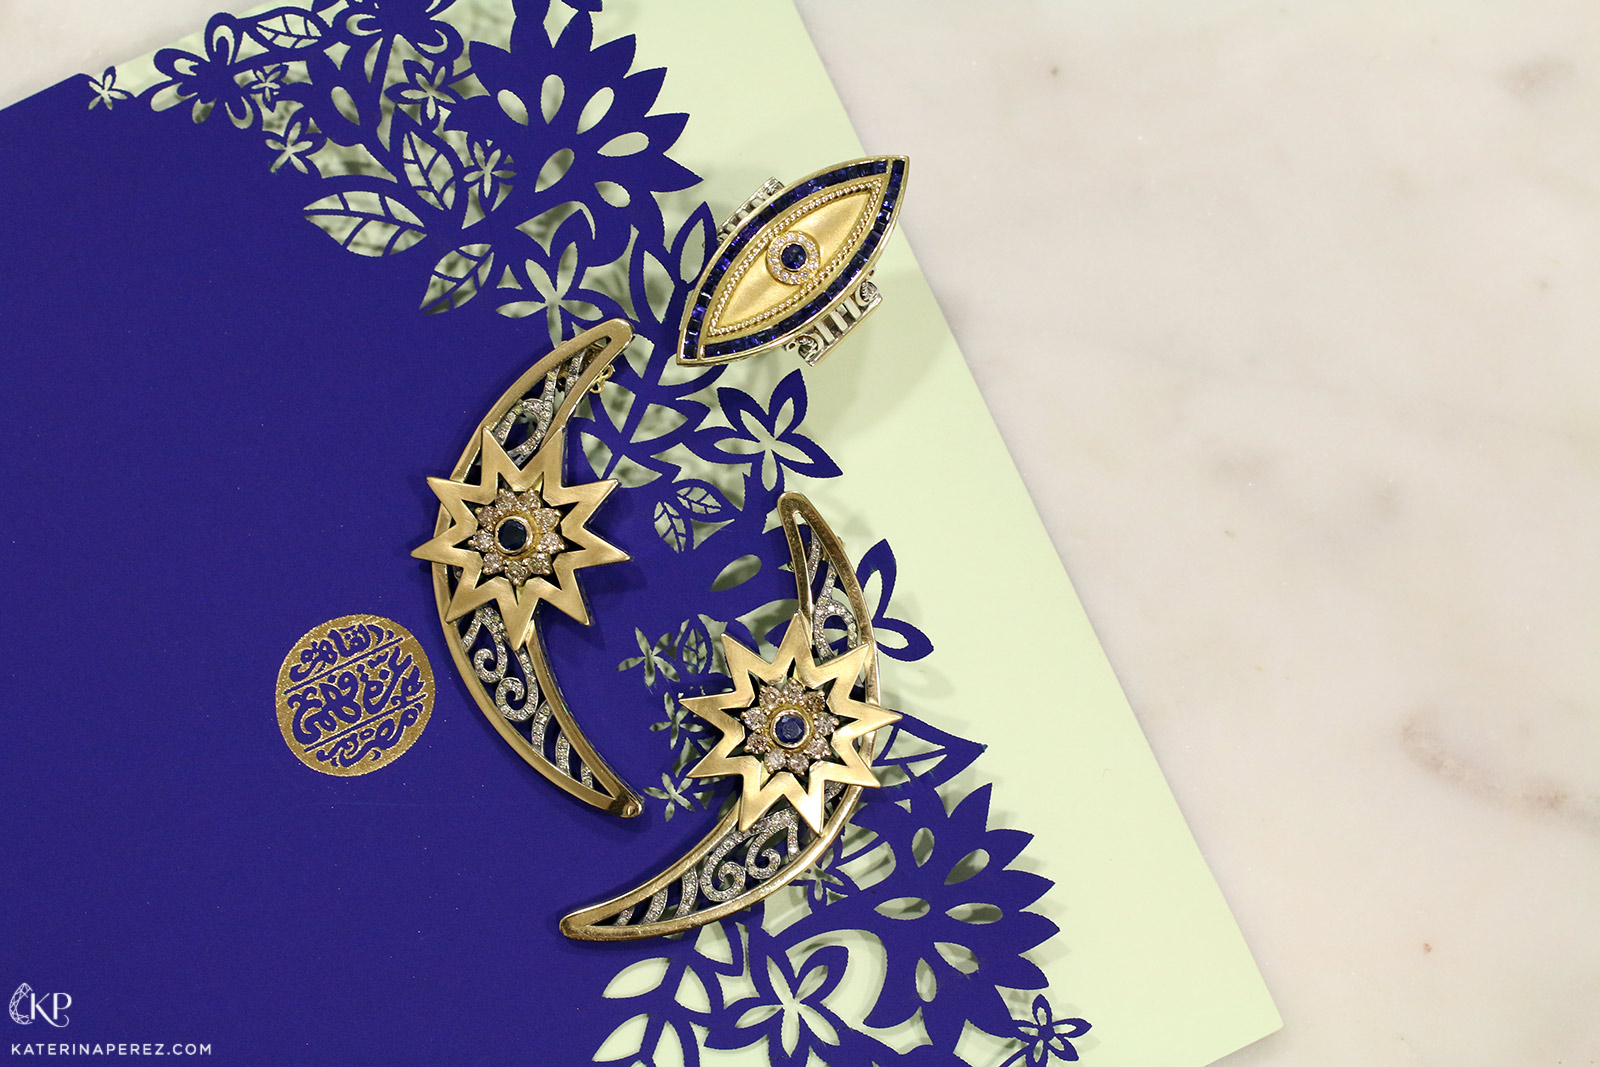 Azza Fahmy The Gypse collection earrings and ring in yellow gold with diamonds and sapphires